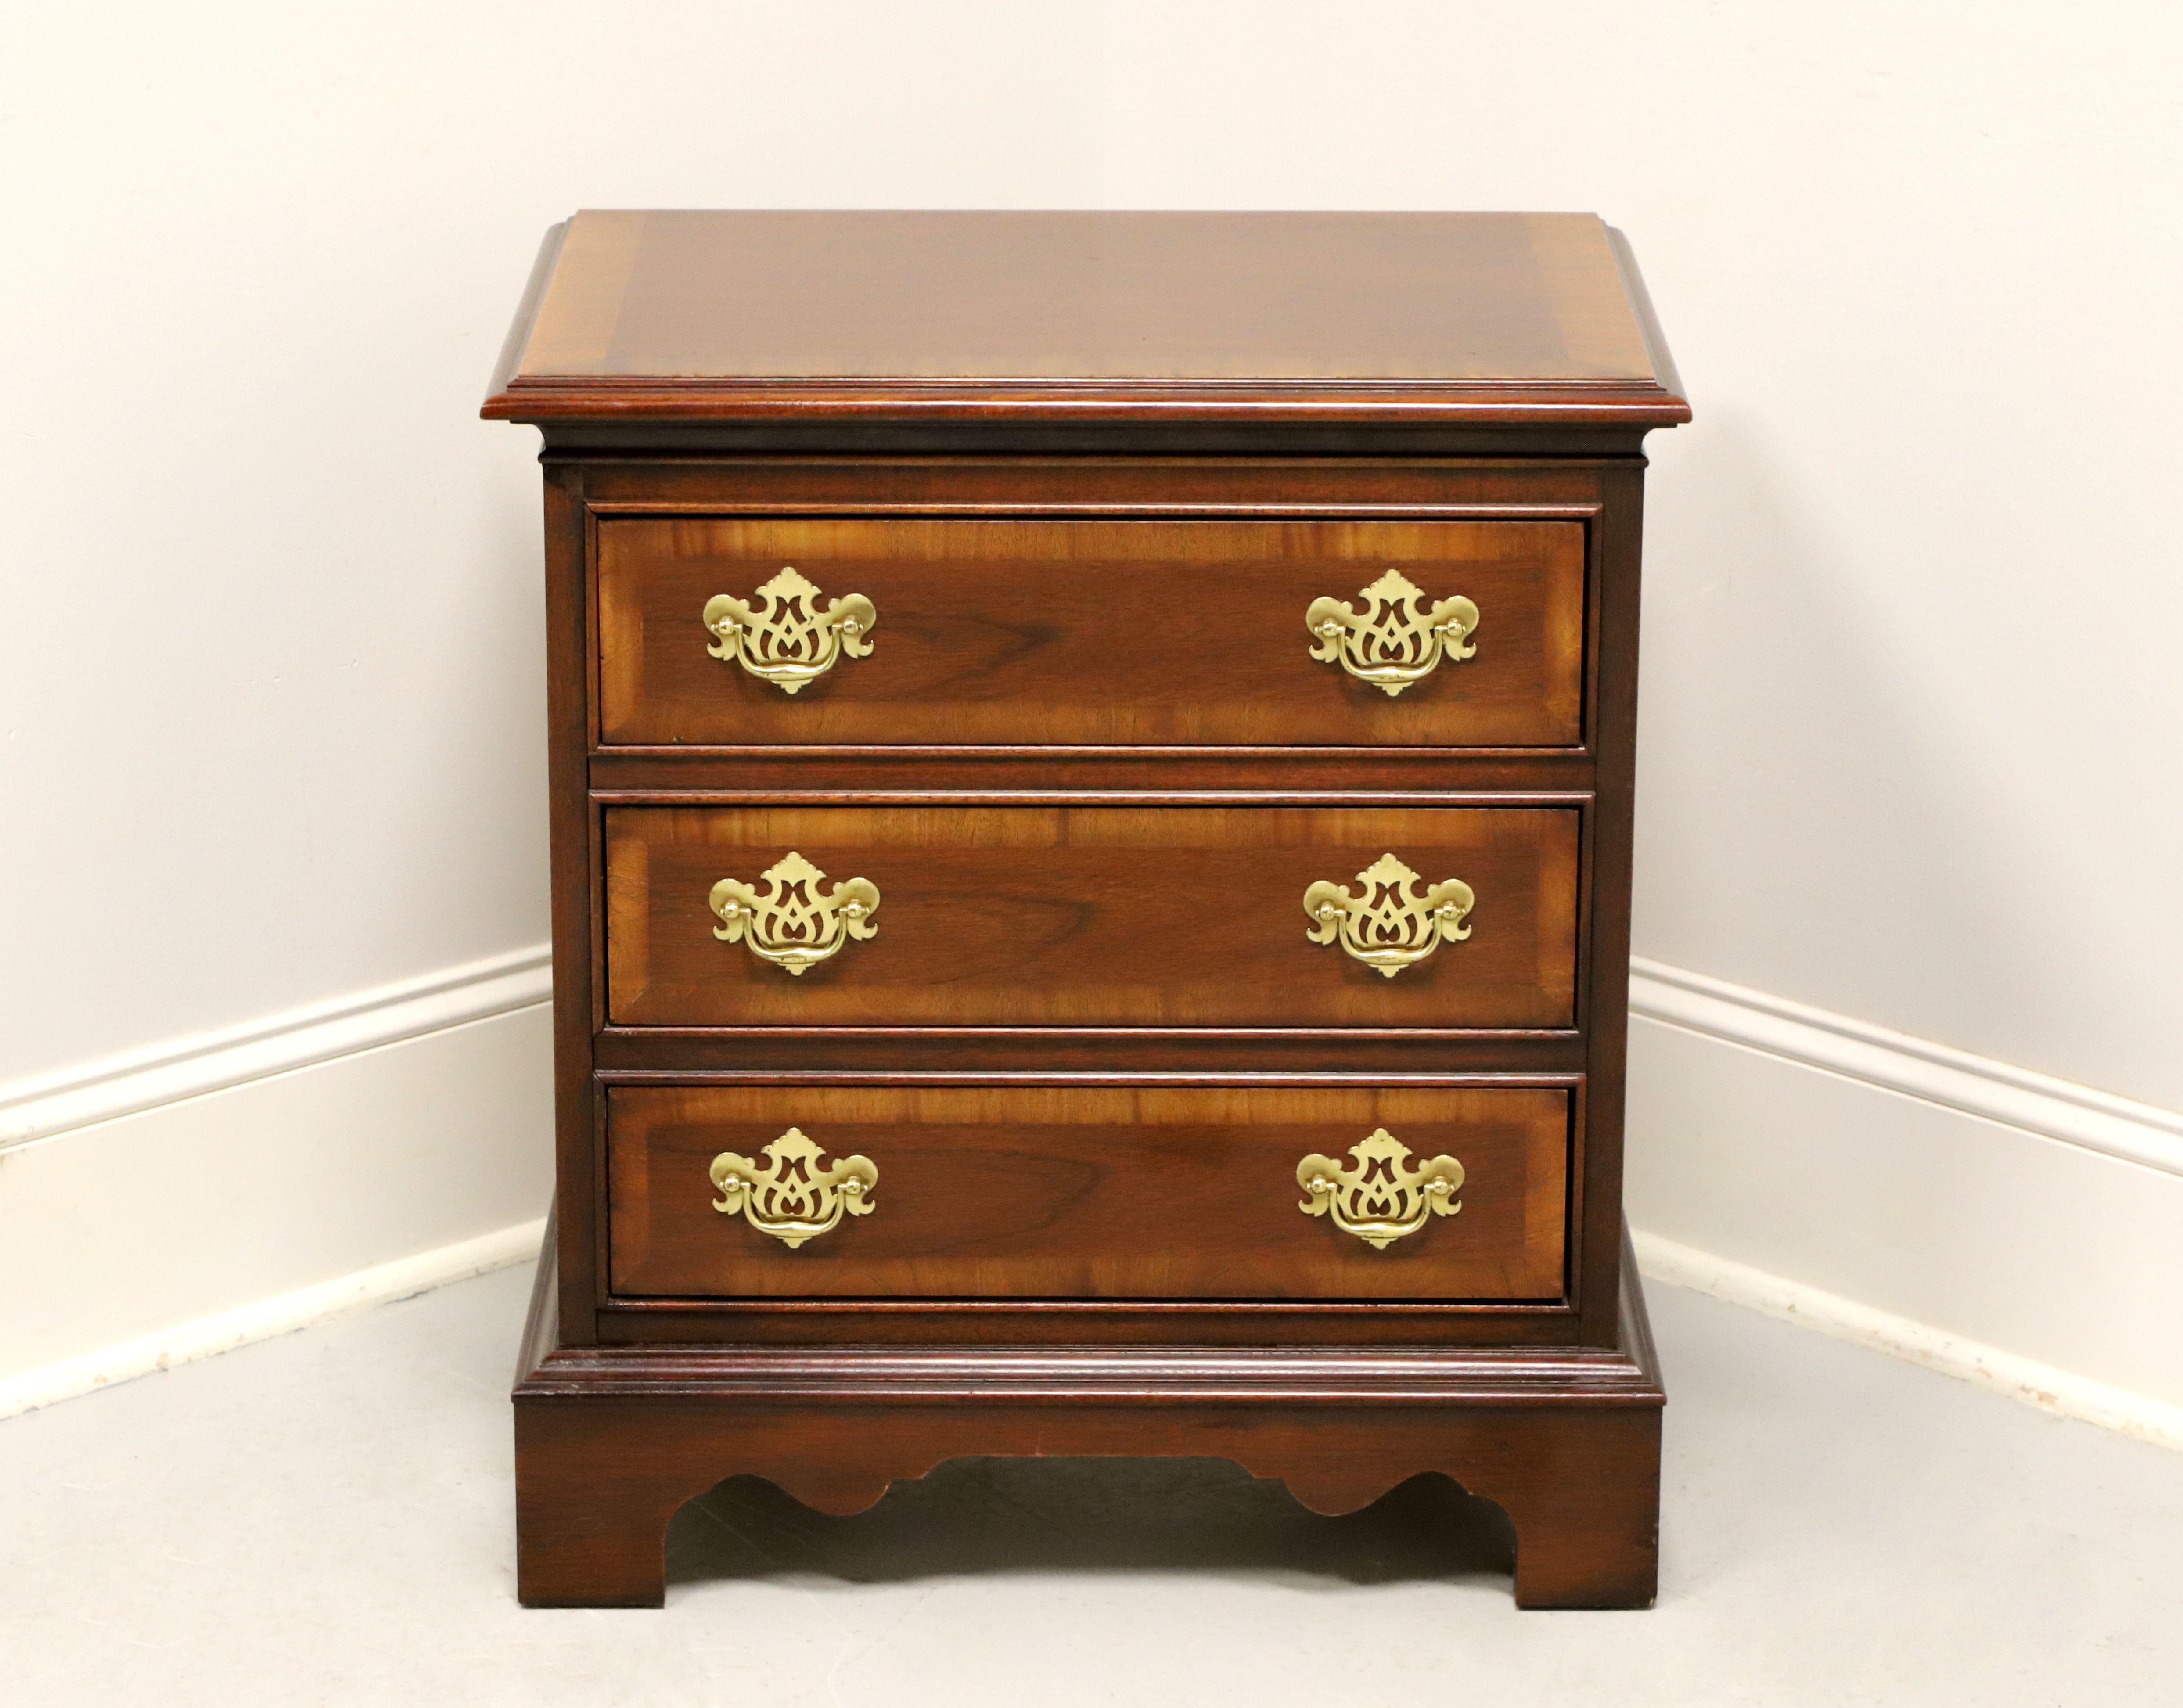 A Chippendale style bedside chest by Dixie Furniture. Mahogany with brass hardware, banded inlaid top with bevel edge, banded drawer fronts, and bracket feet. Features three drawers of dovetail construction. Made in Lenoir, North Carolina, USA, in